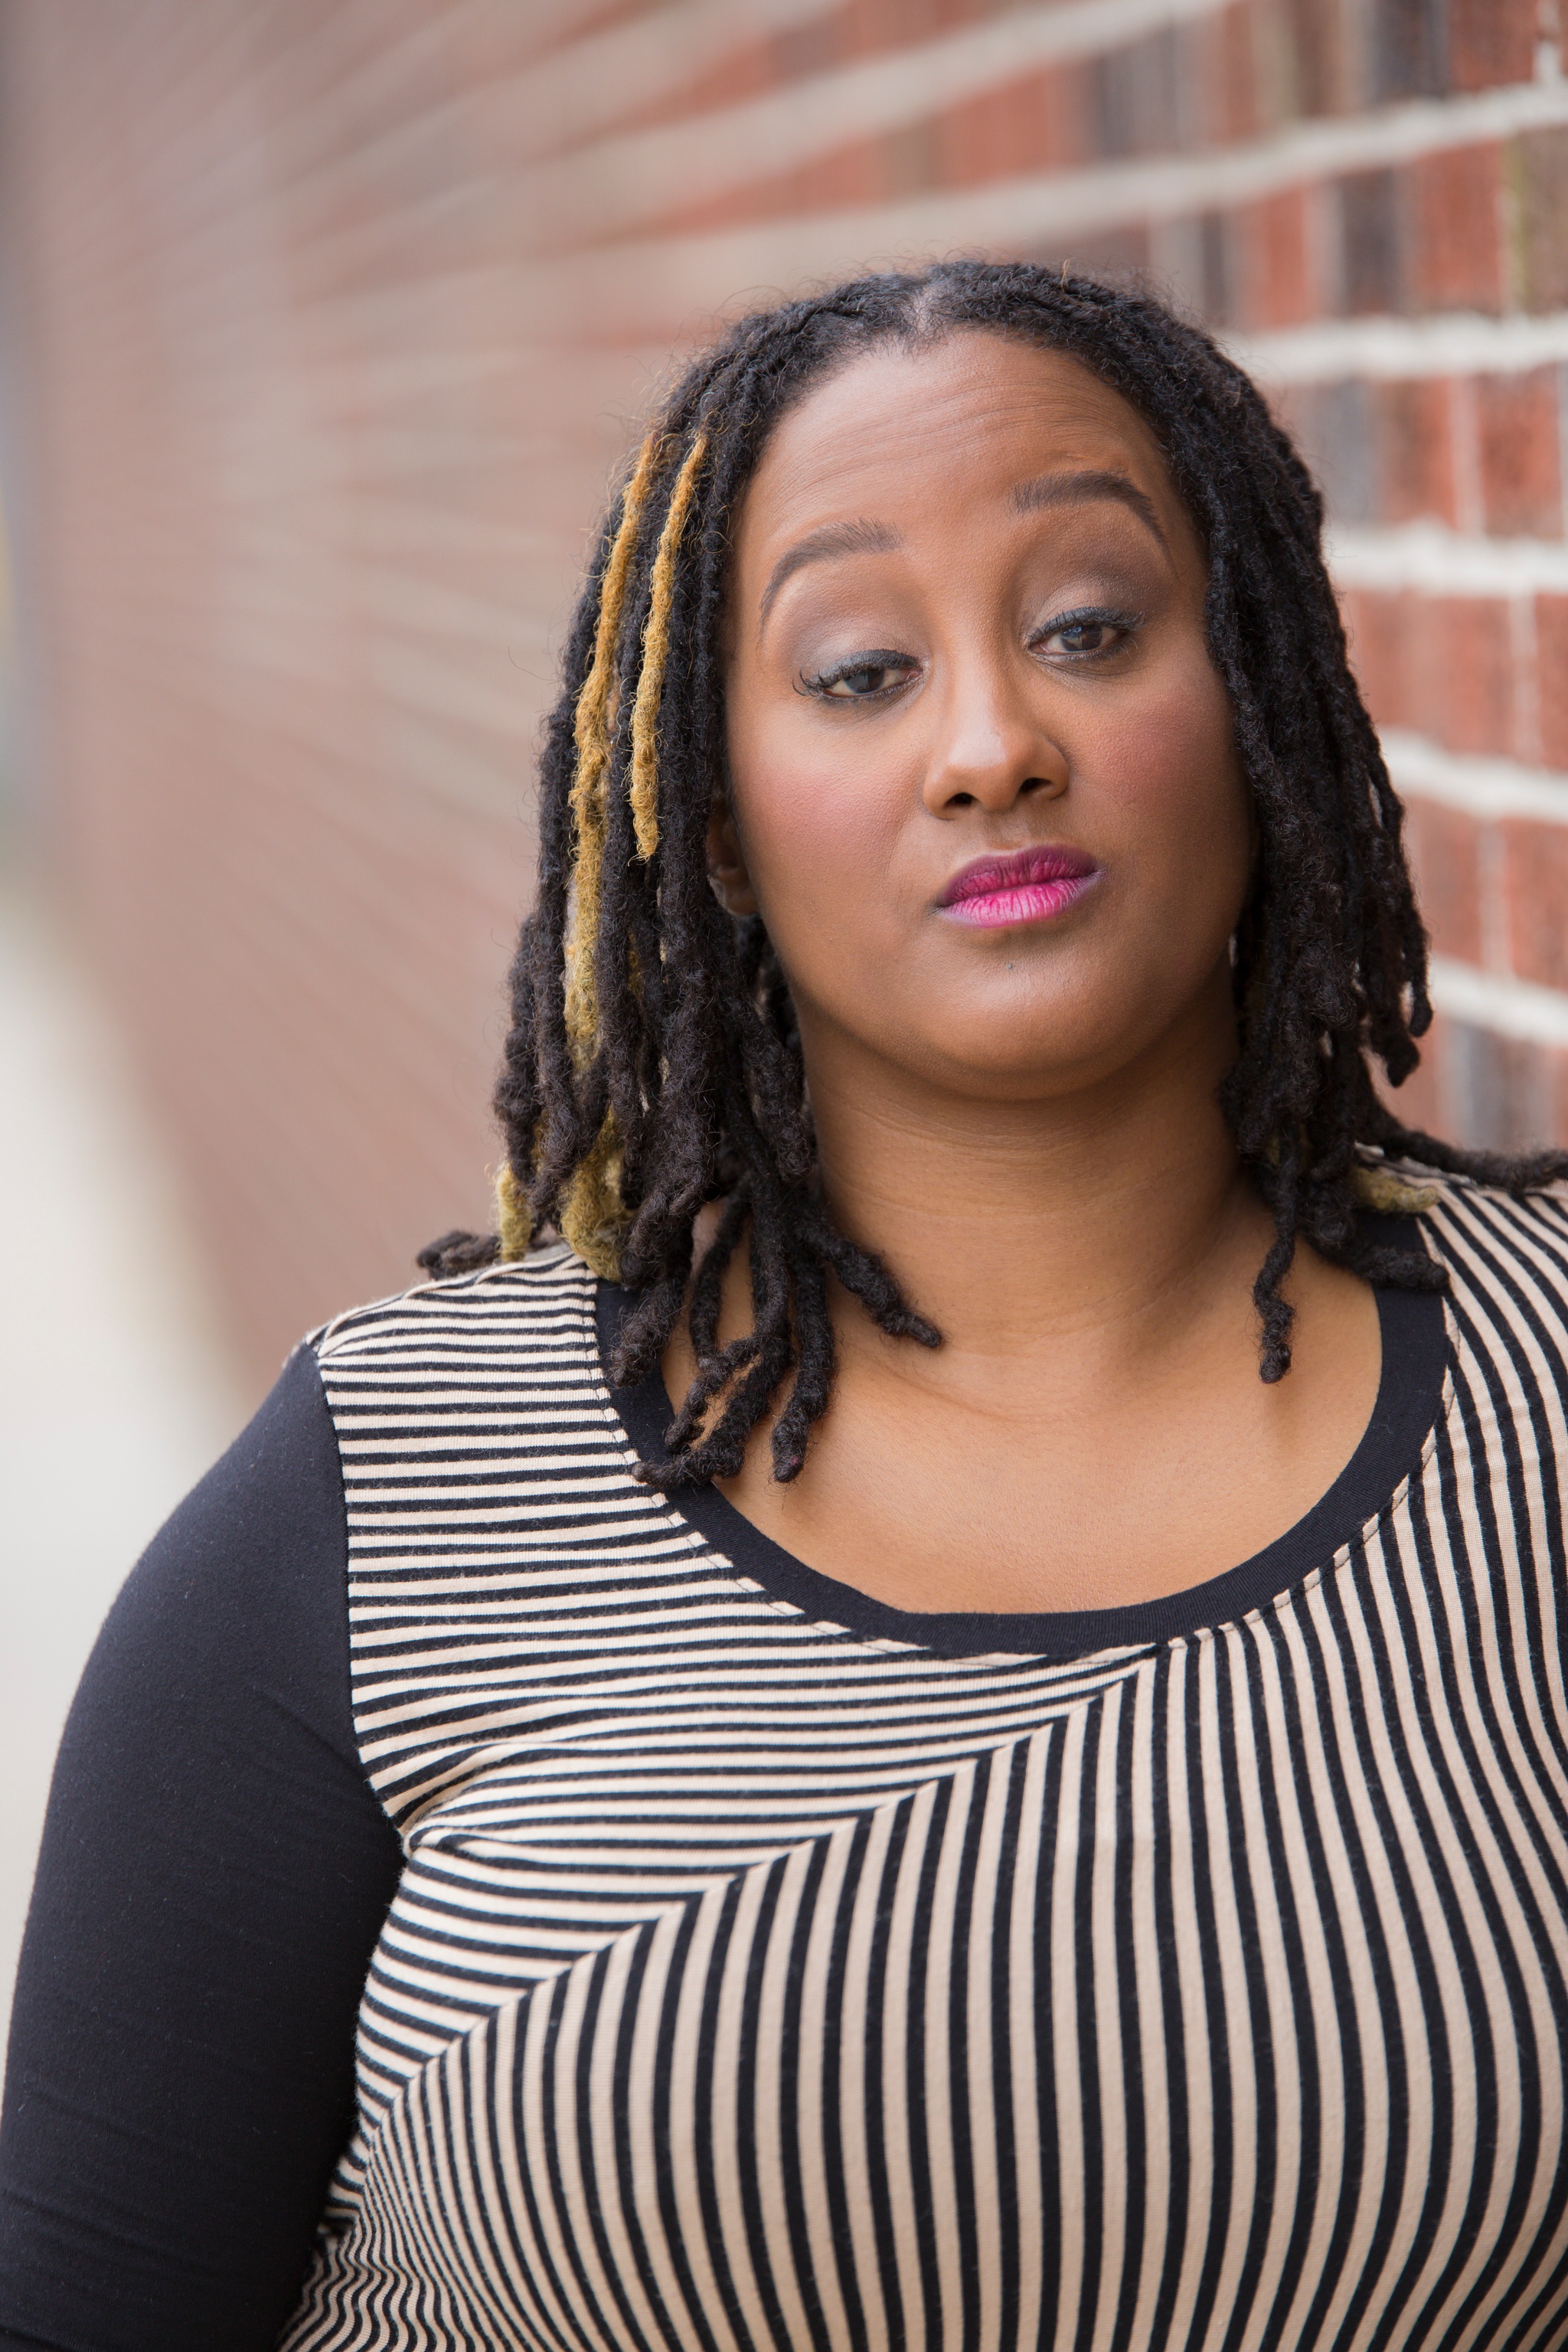 This is a headshot of Kayla Hamilton, who is a dark brown-skinned Black woman. She is posing in front of a blurred brick wall. She is wearing a long sleeve black & white striped shirt. She has light makeup and her gaze is towards us. Her black & golden highlighted dreads are down.] Photo by: Travis Magee